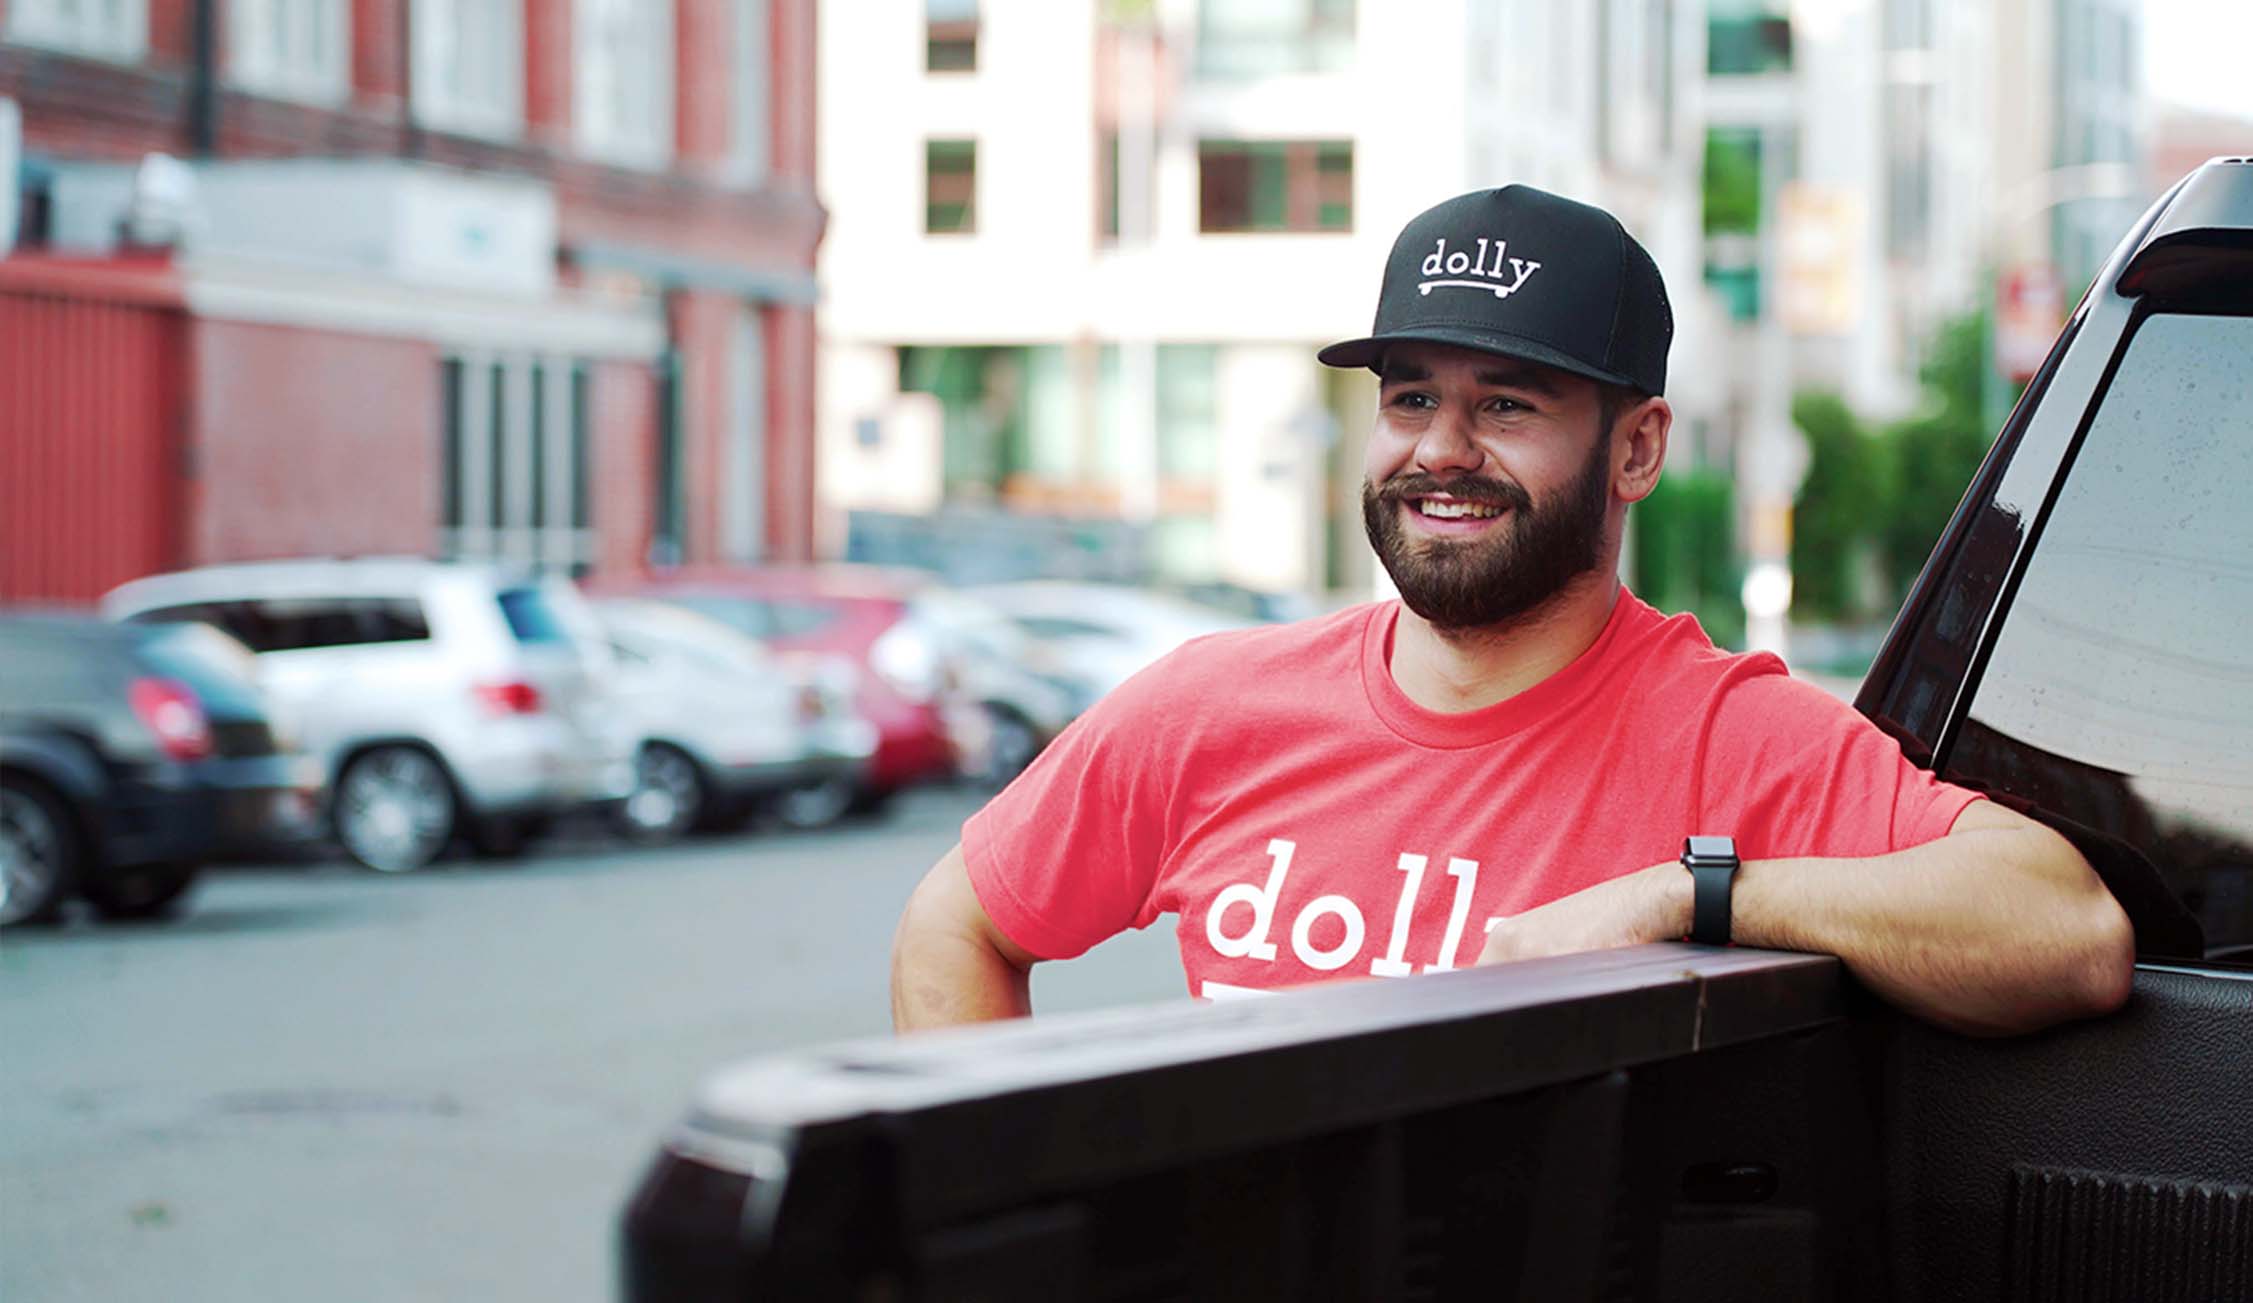 dolly delivery truck - dolly delivery service - dolly discount code